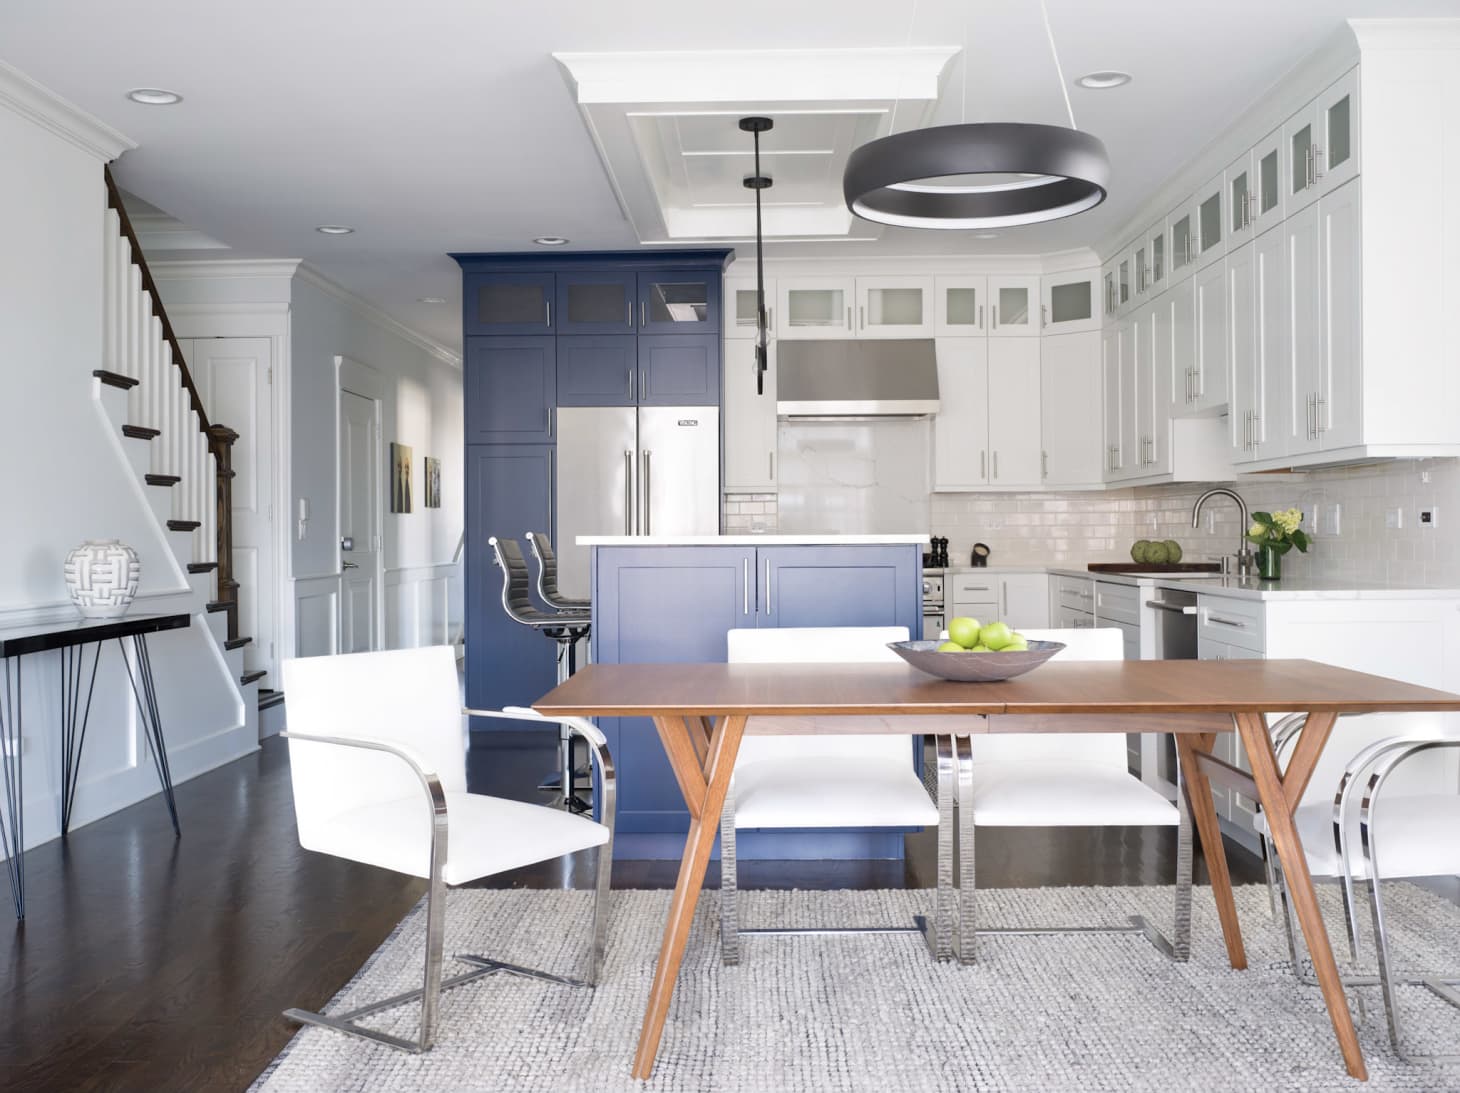 Kitchen Cabinet Trends for 2020 | Kitchn